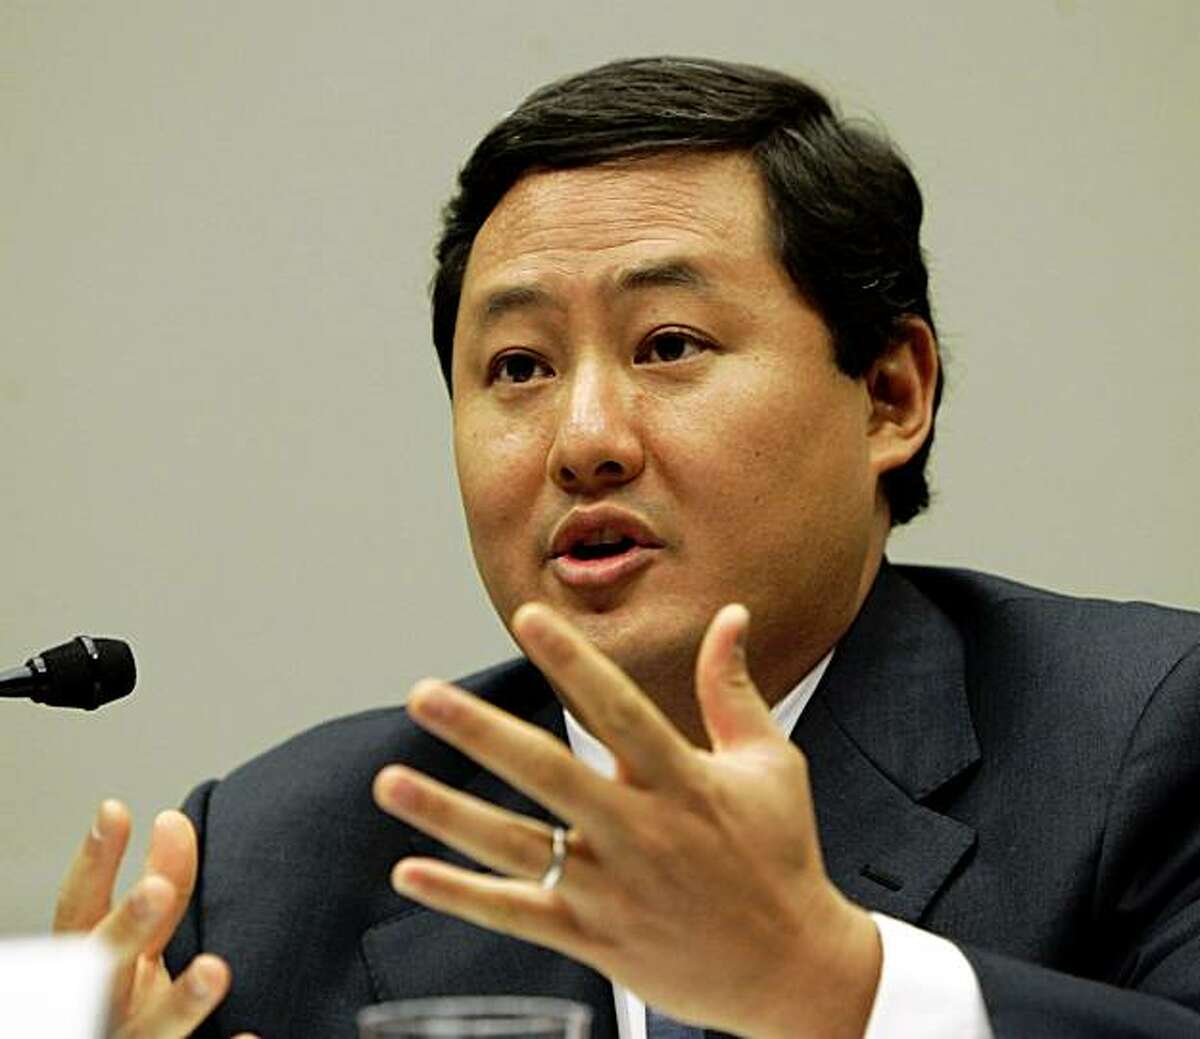 File - In this June 26, 2008 file photo John Yoo, a law professor at the University of California at Berkeley, testifies on Capitol Hill in Washington. Justice Department officials have stopped short of recommending criminal charges against Bush administration lawyers who wrote secret memos approving harsh interrogation techniques of terror suspects. (AP Photo/Susan Walsh, File)